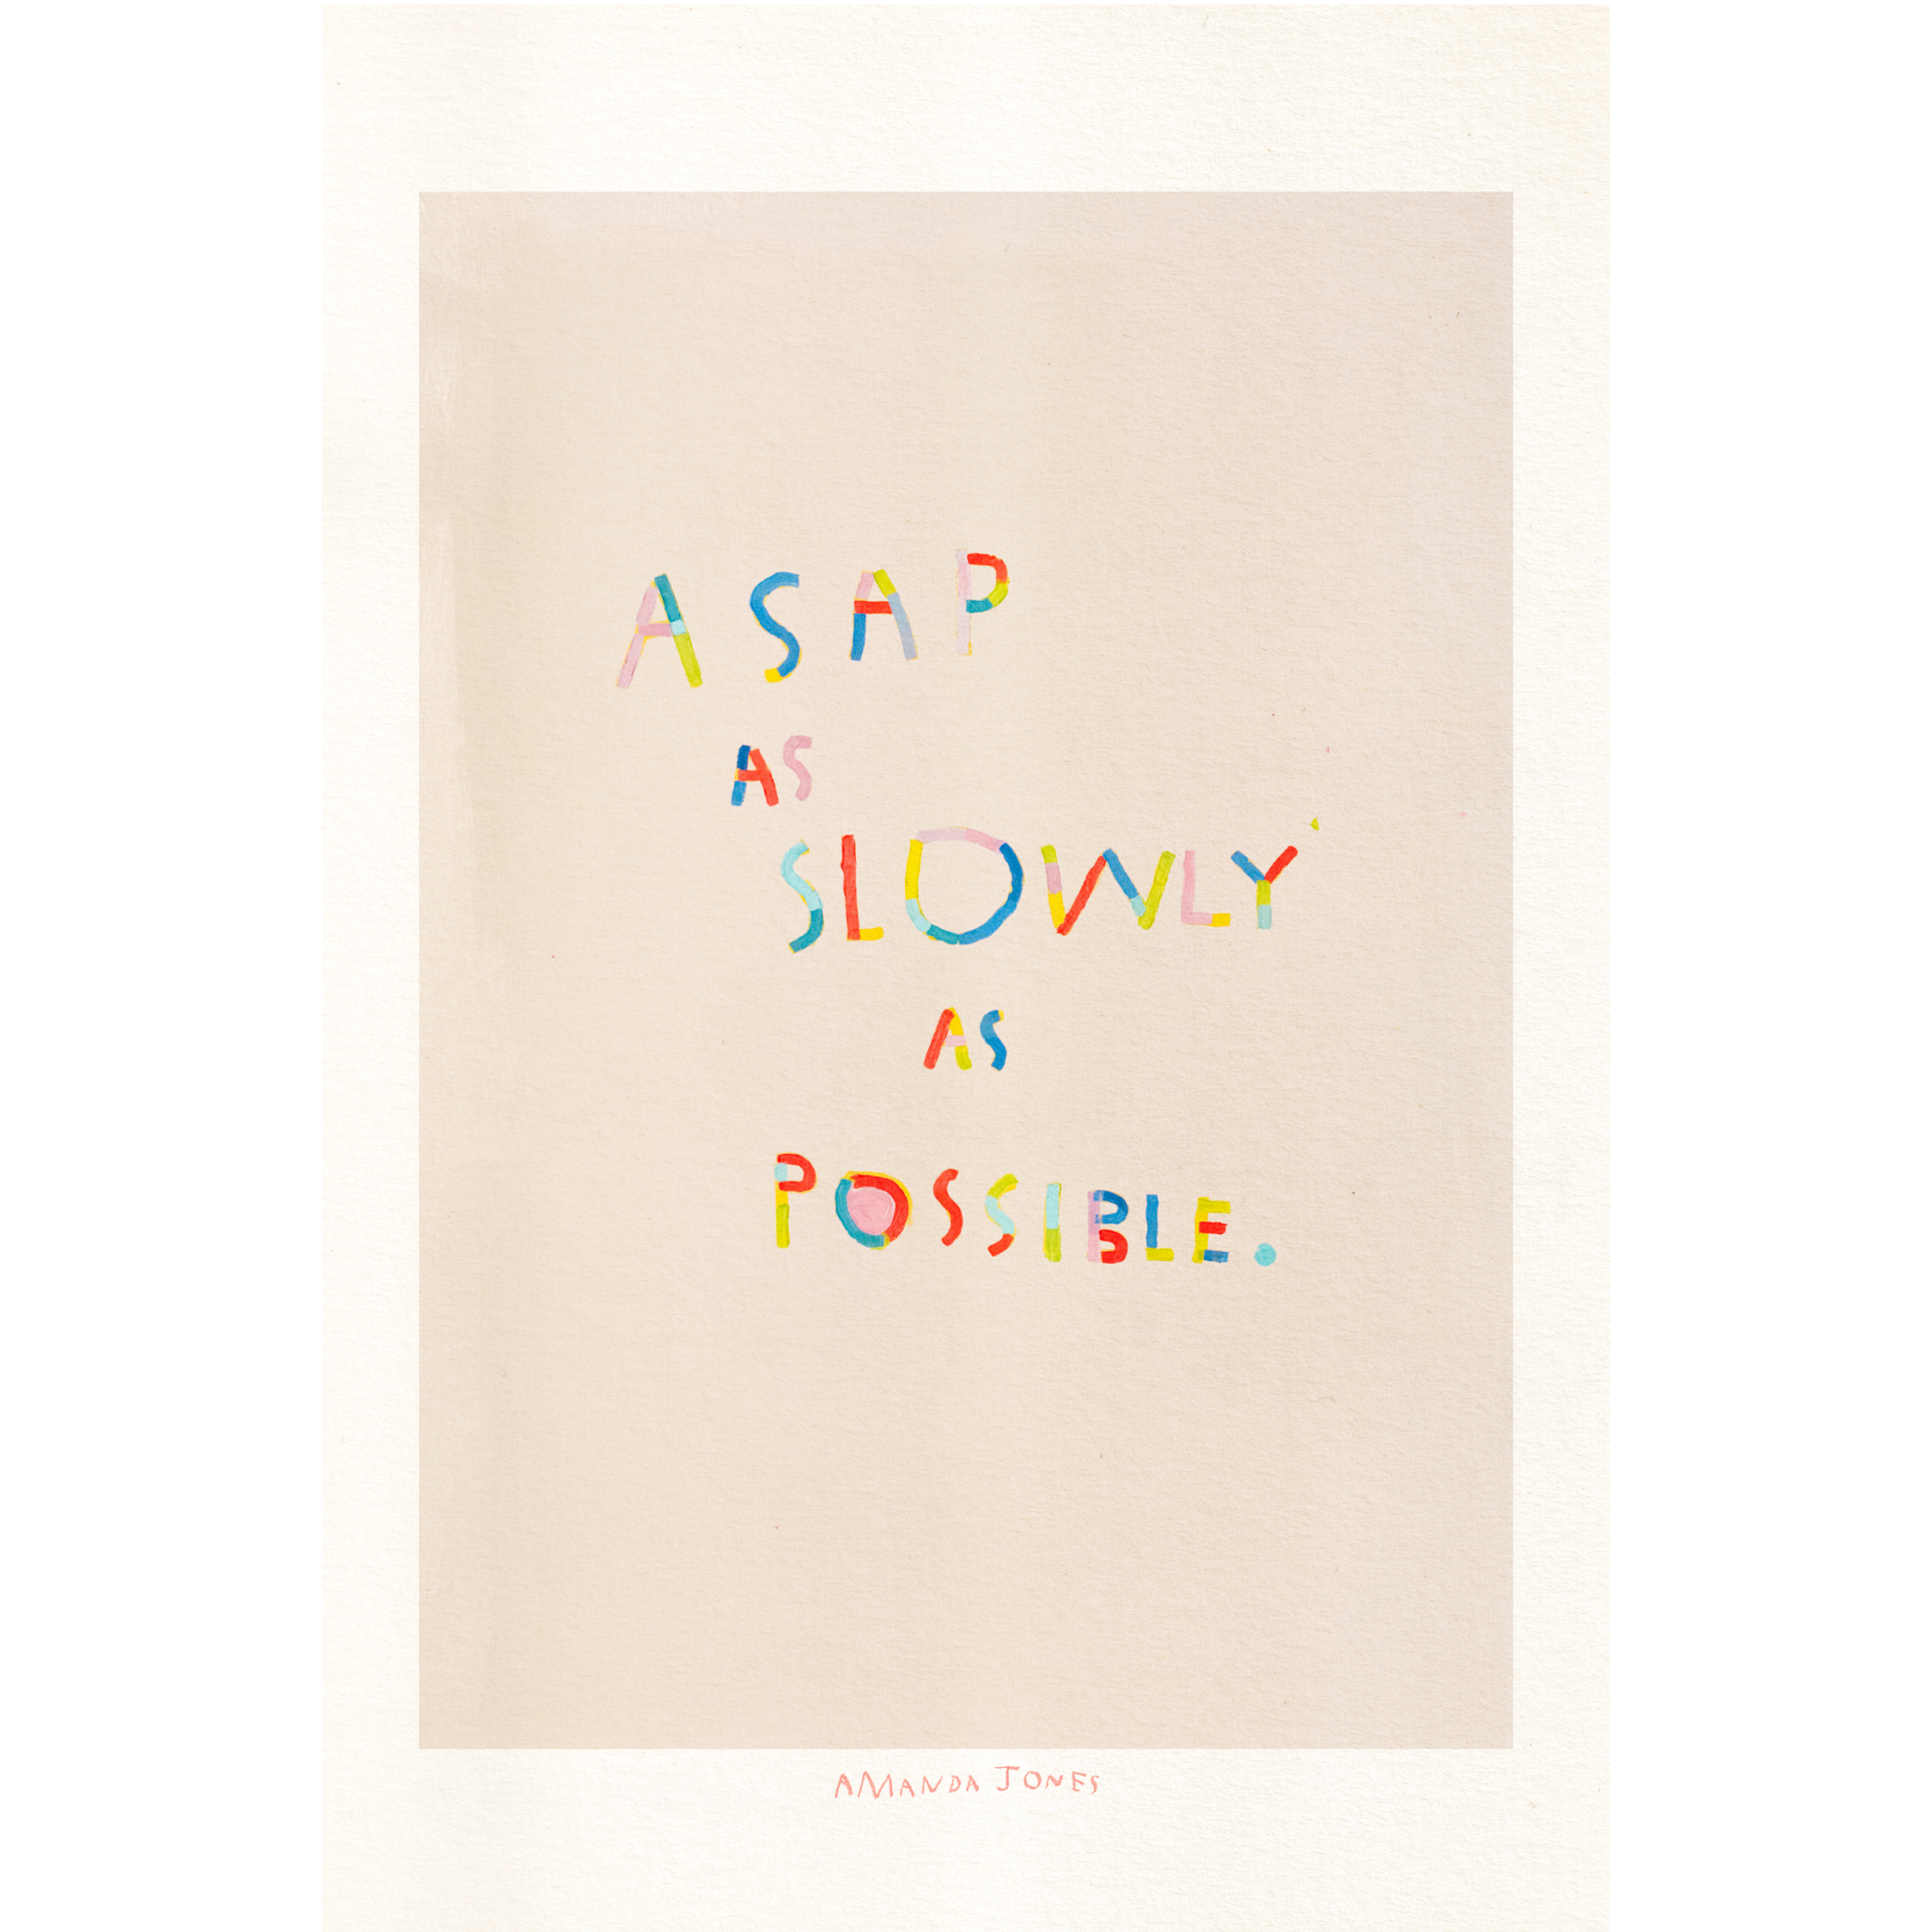 'As Slowly As Possible'